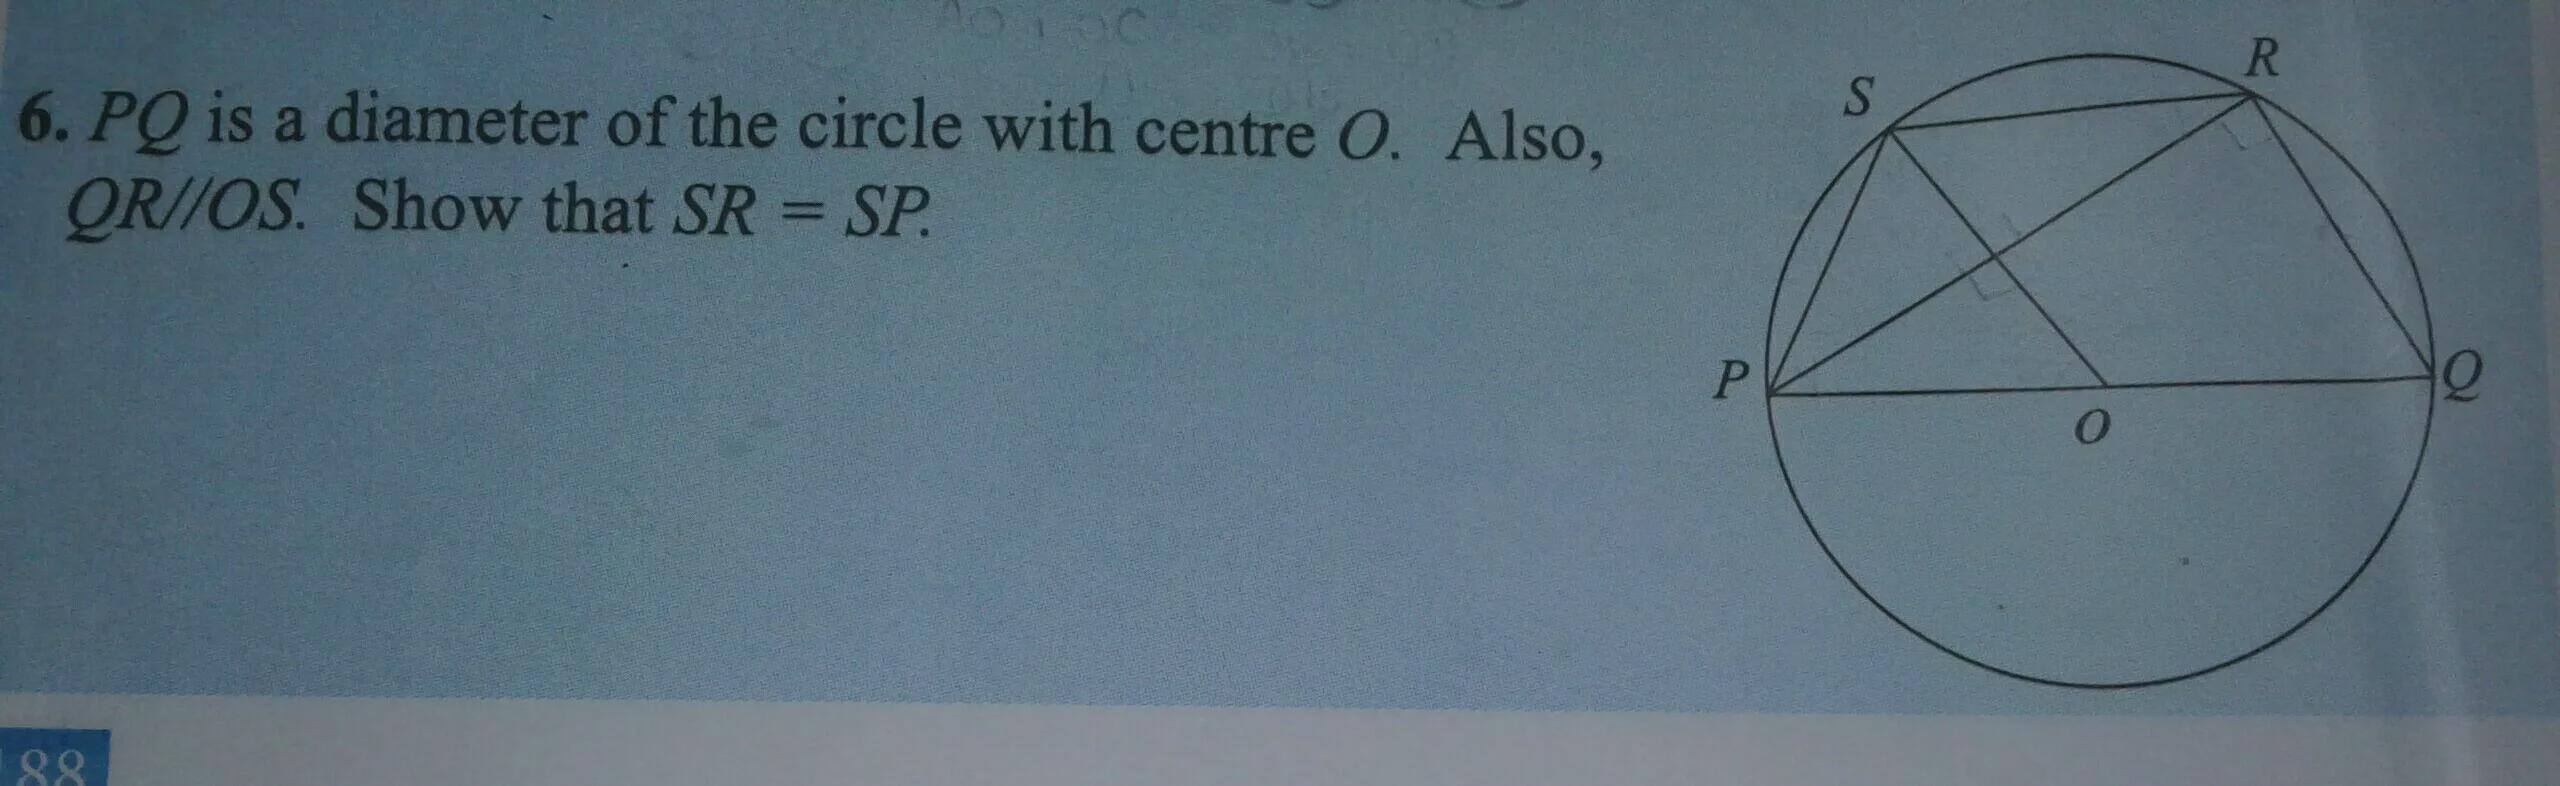 Answer This Question Based On The Knowledge Of Angle In A Circle. 